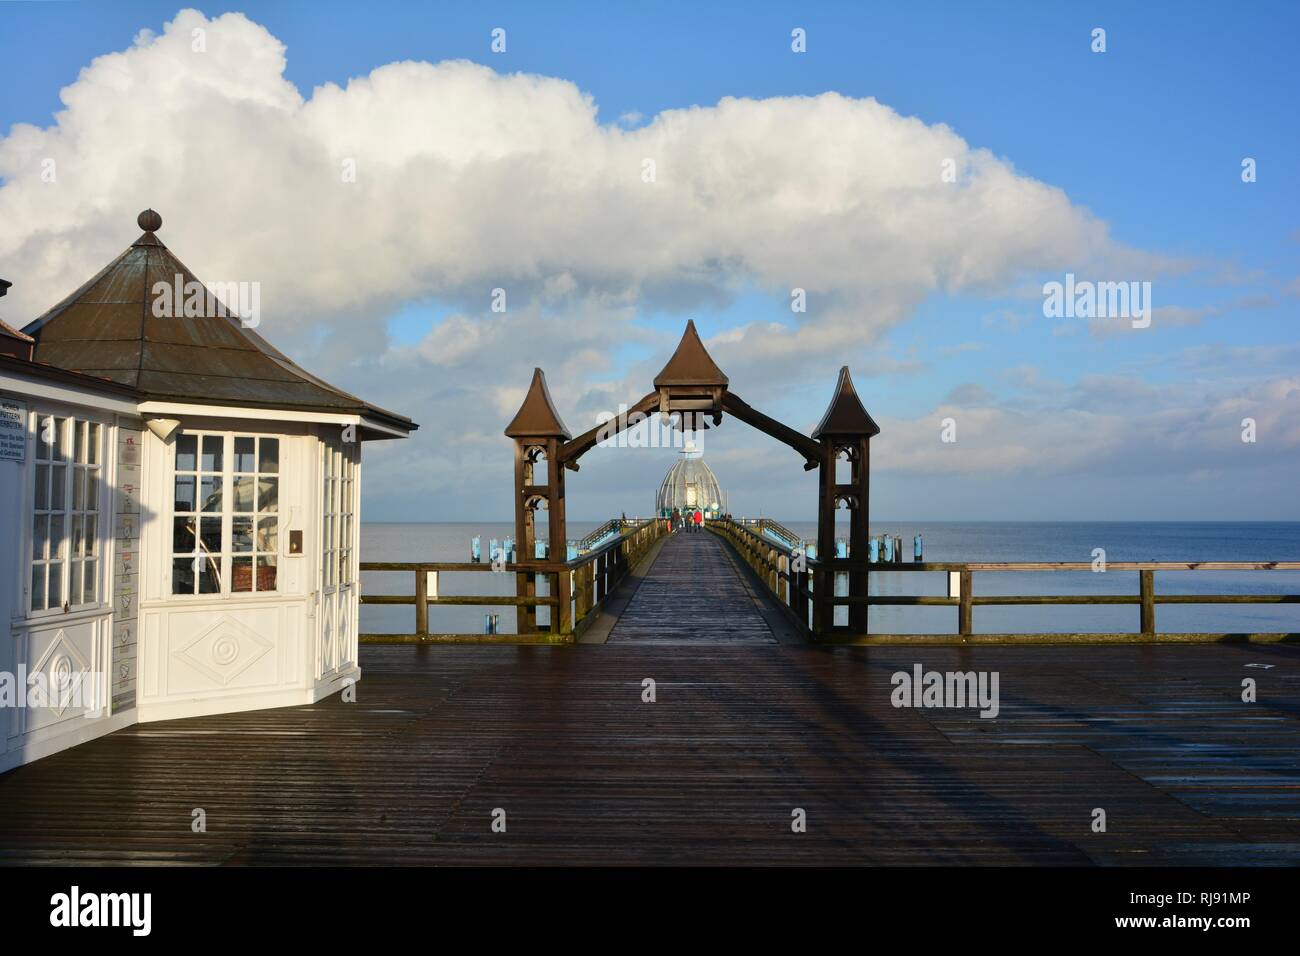 View through a wooden arch to the diving gondola on the pier in Sellin, on Rügen in Germany Stock Photo